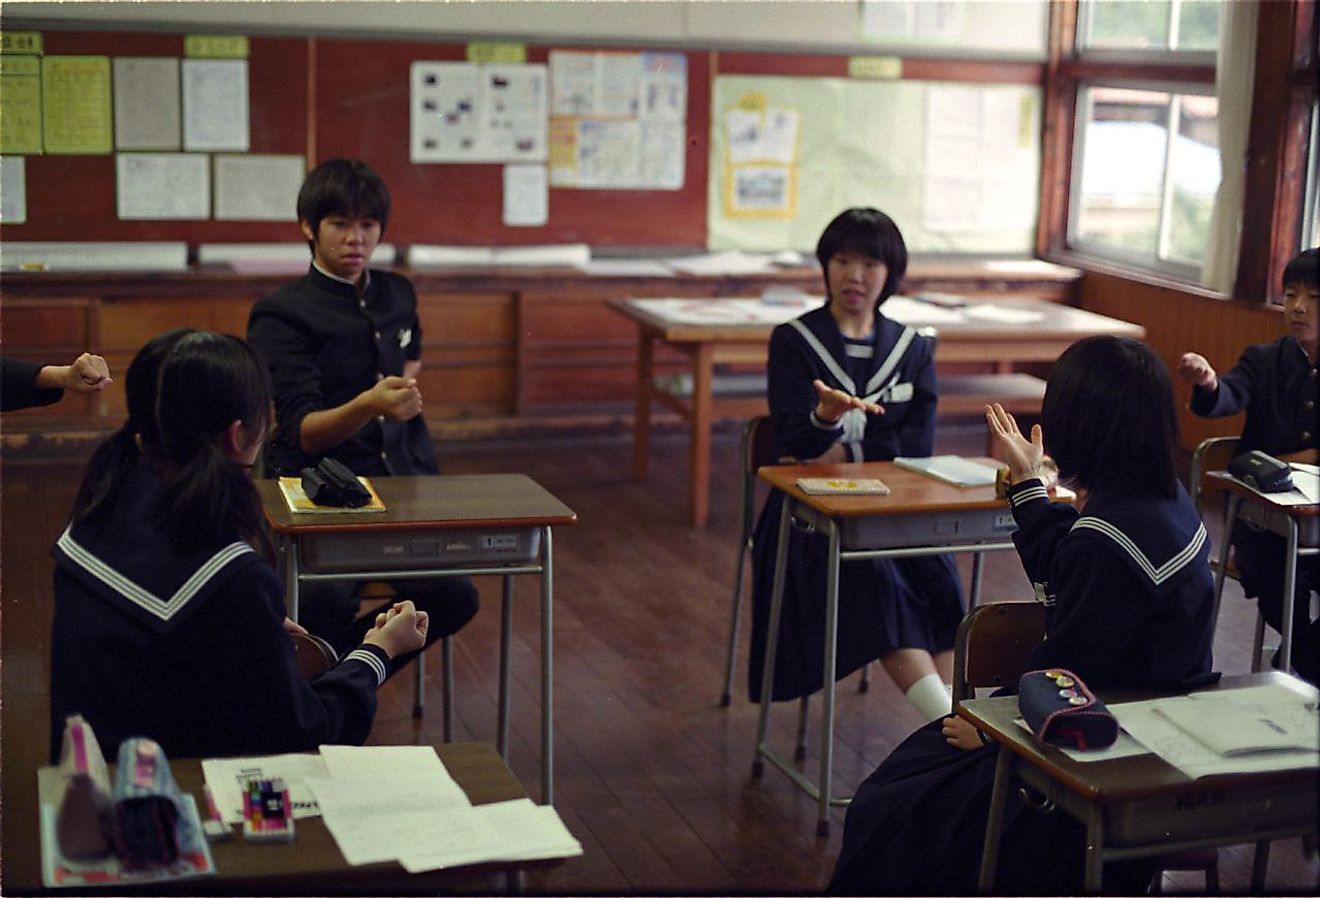 English class in Uta Junior High School, Japan. Image credit: Aka Hige from from Dento/Wikimedia.org